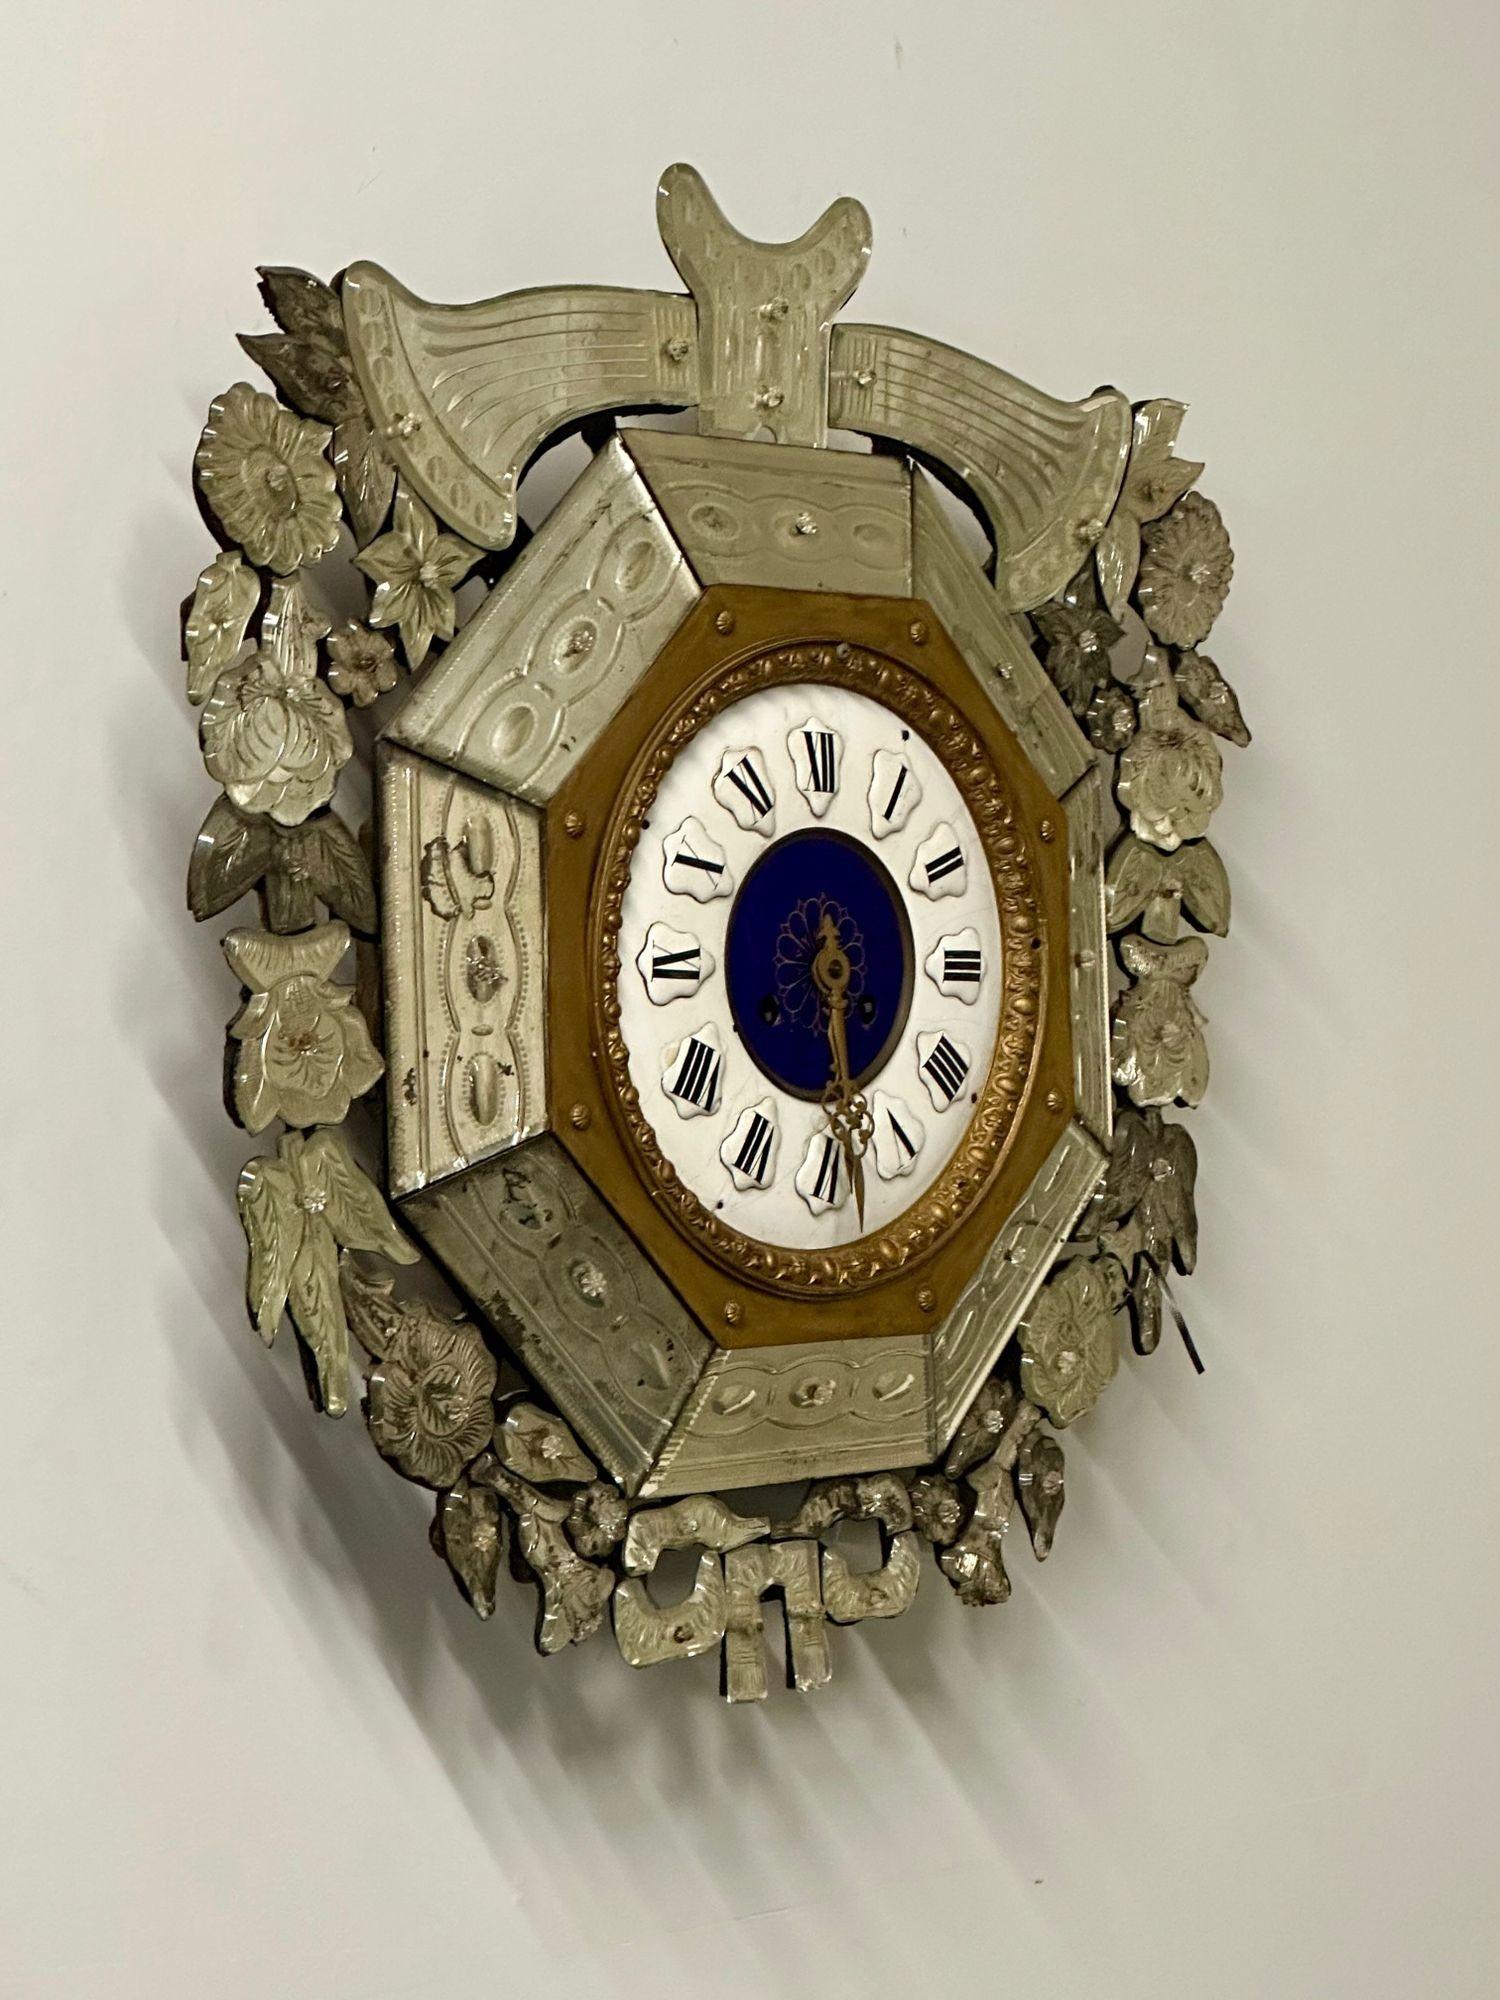 Viennese Enamel and Mirrored Hanging Wall Clock, Porcelain Face, Art Deco, 1960s In Good Condition For Sale In Stamford, CT